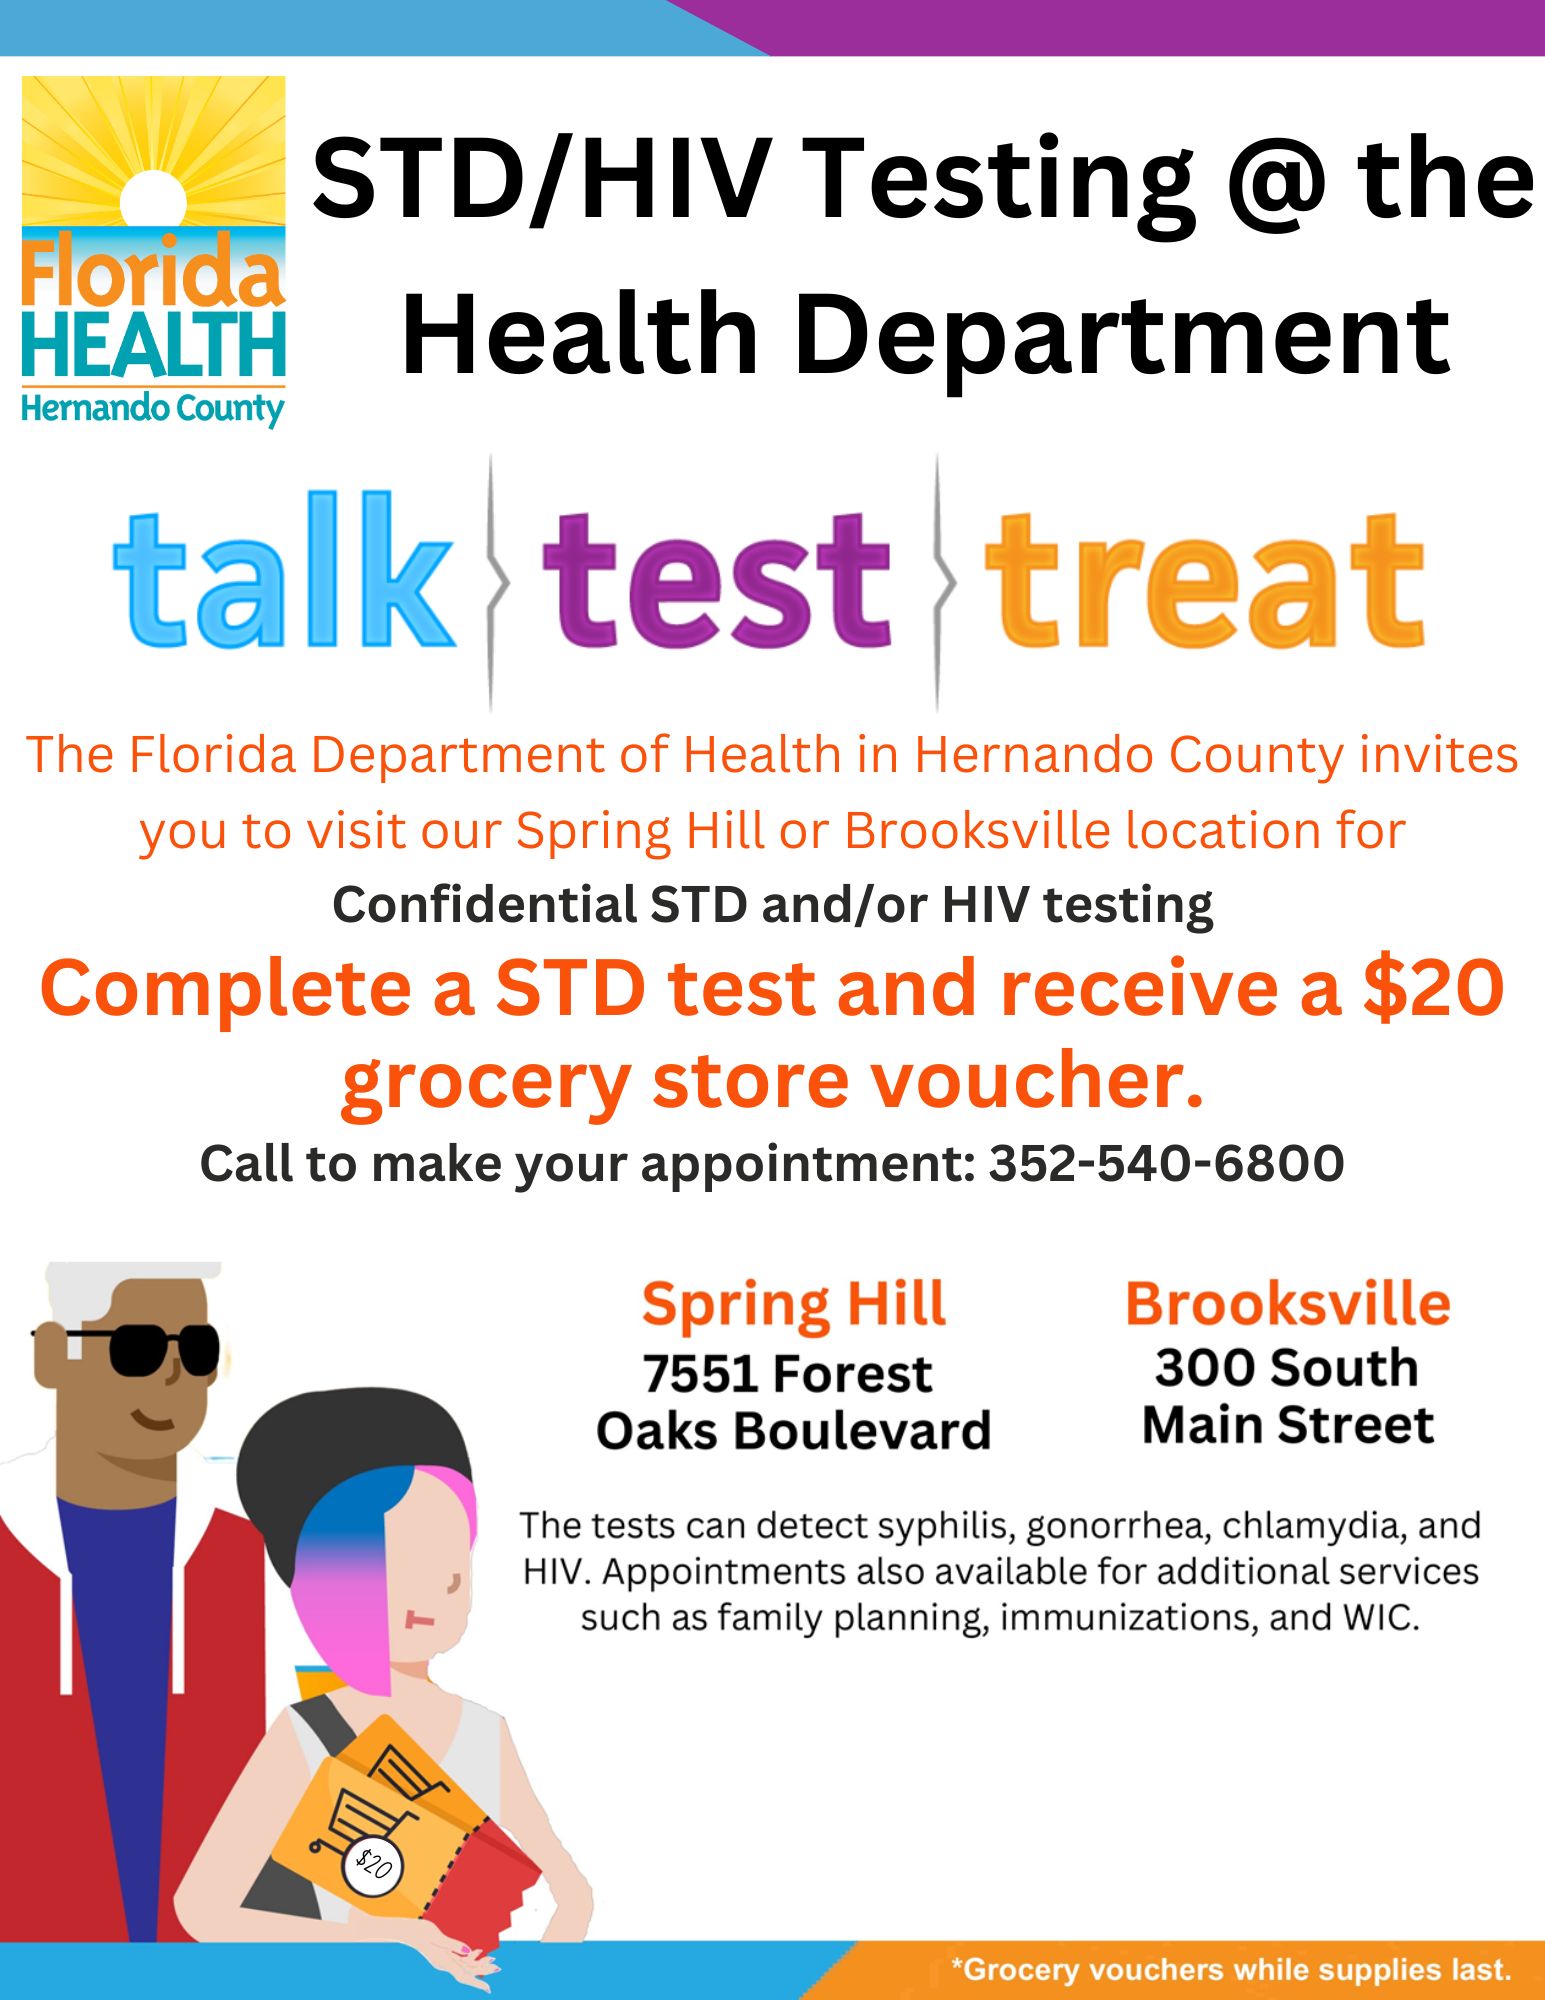 Sexually Transmitted Diseases Florida Department of Health in Hernando